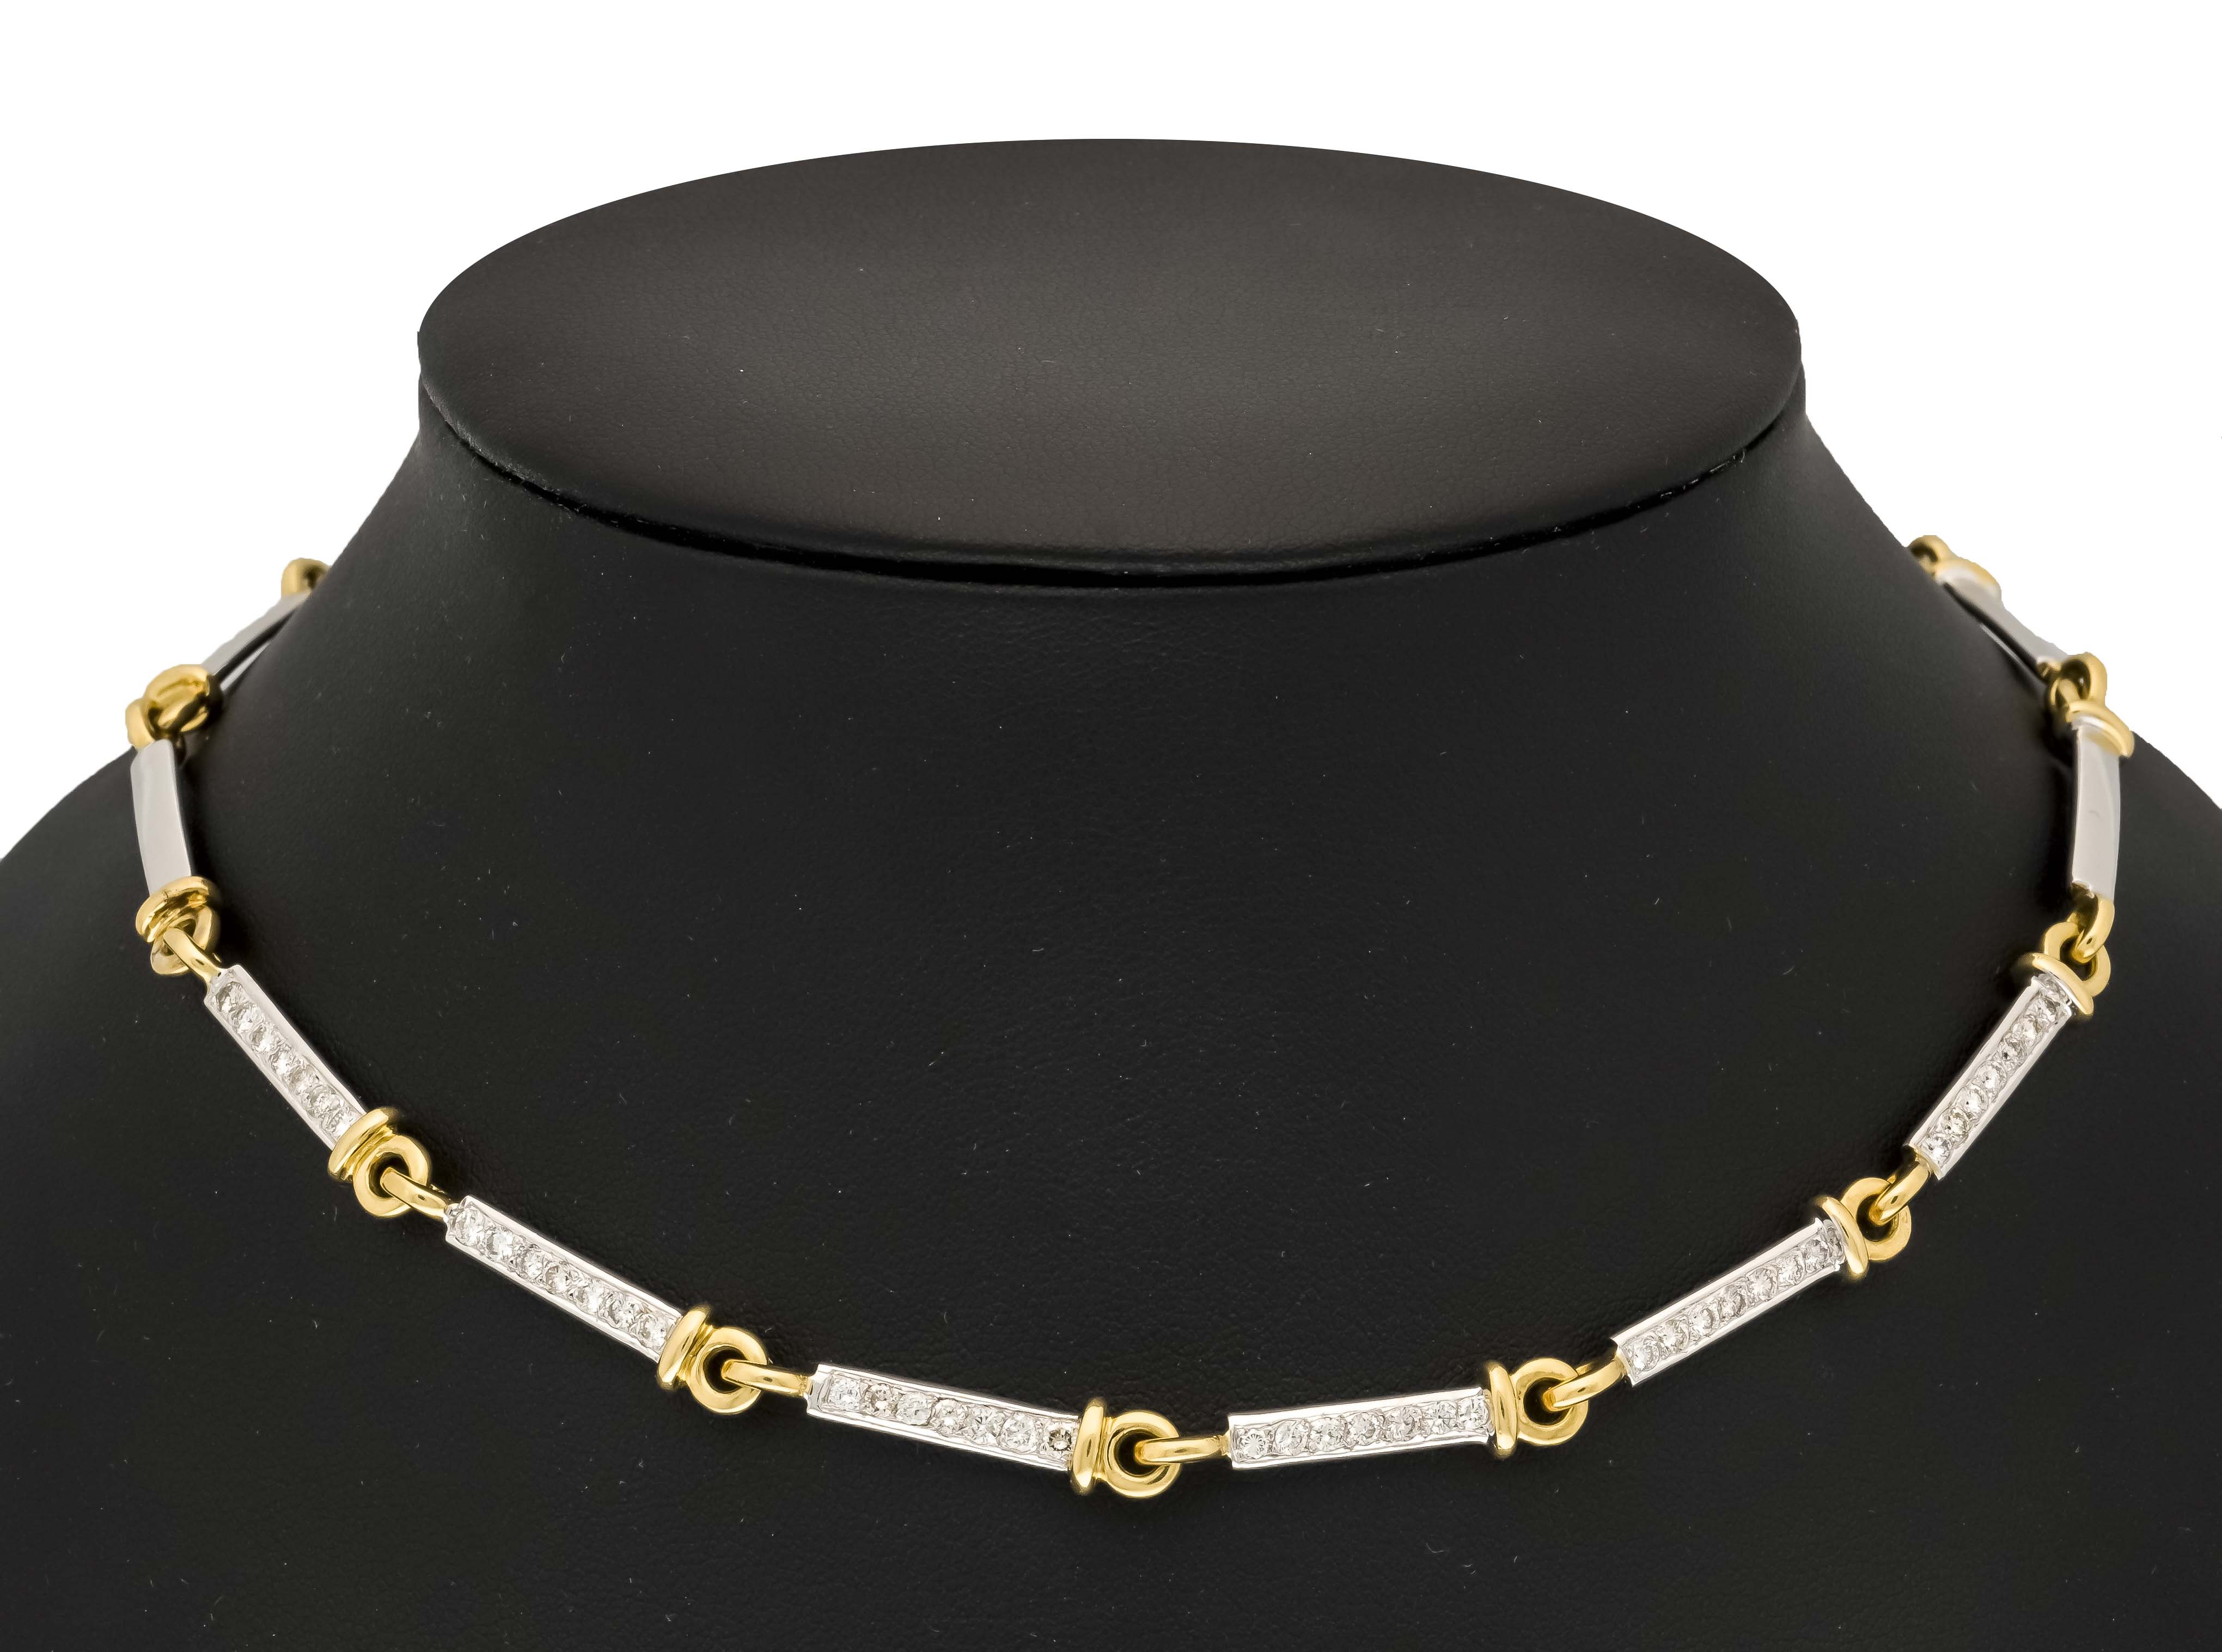 Brilliant link necklace WG/GG 750/000 with 42 brilliant-cut diamonds, total 2.10 ct white-lightly